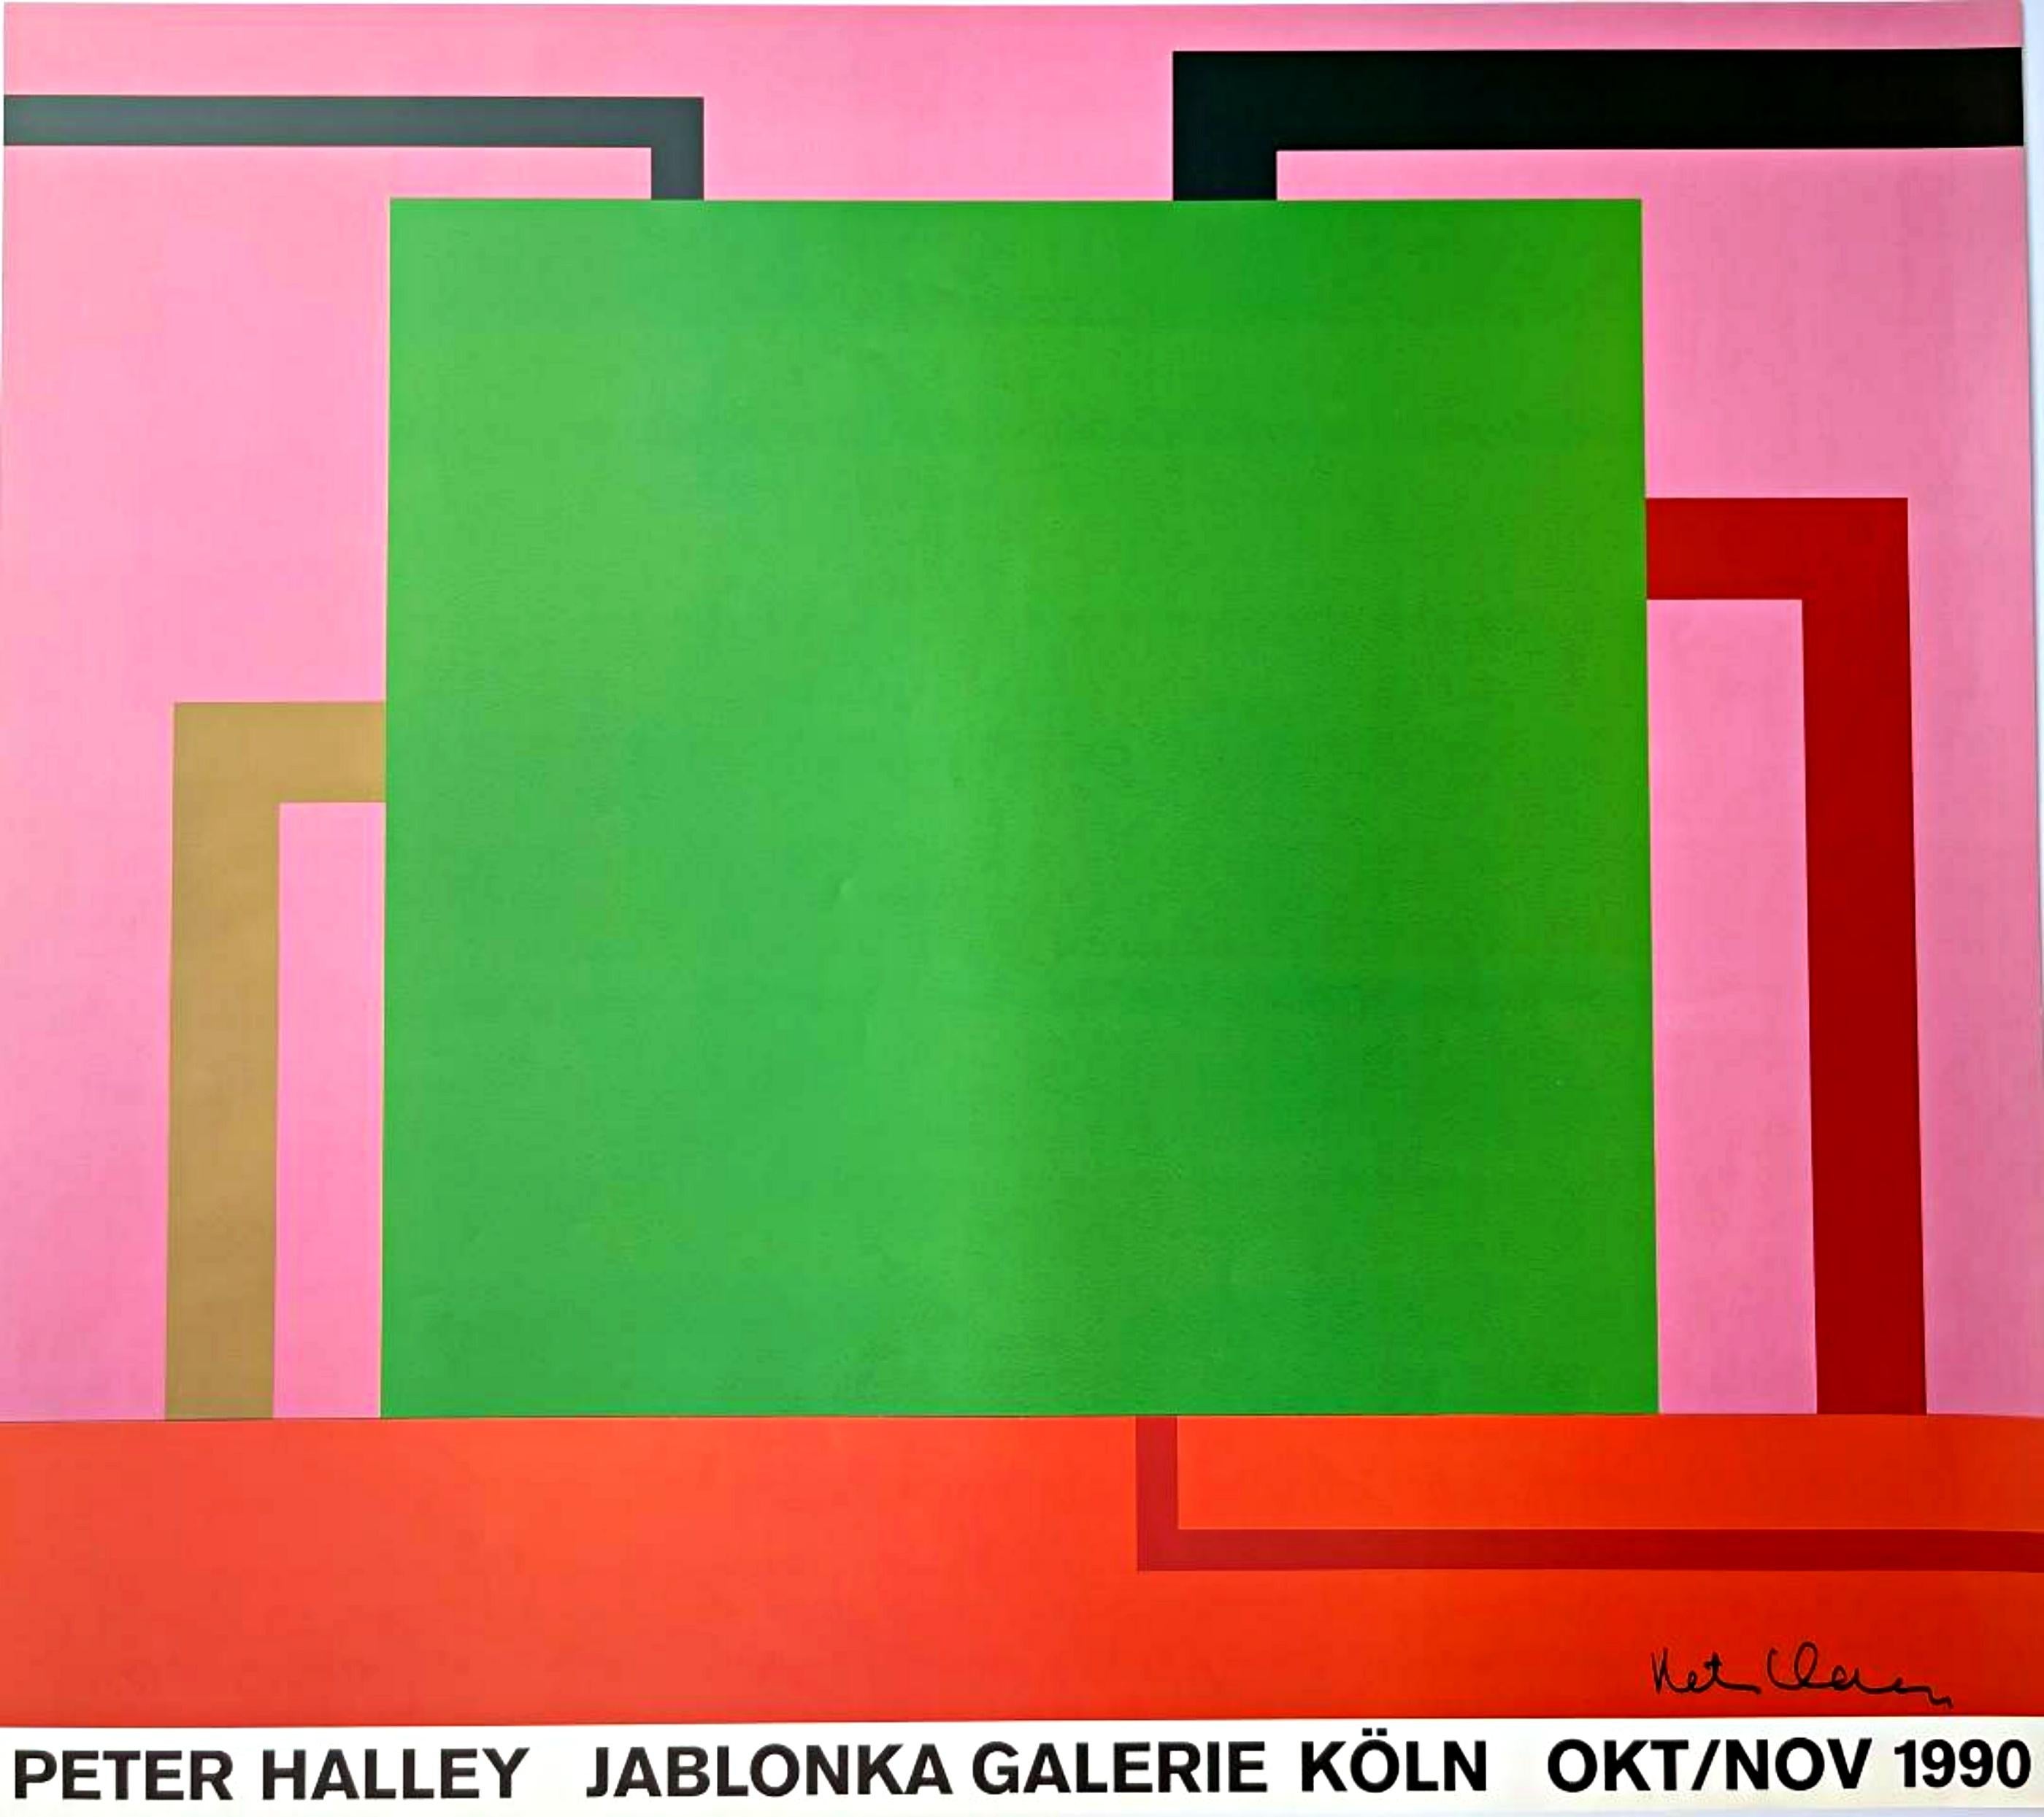 Peter Halley
Jablonka Galerie, Köln (Hand Signed), 1990
Offset lithograph (Hand Signed by Peter Halley)
26 1/2 × 30 inches (ships rolled in a tube 37 x 6 x 6)
Signed by Peter Halley in black marker on the front
Unframed
Alpha 137 Gallery is honored